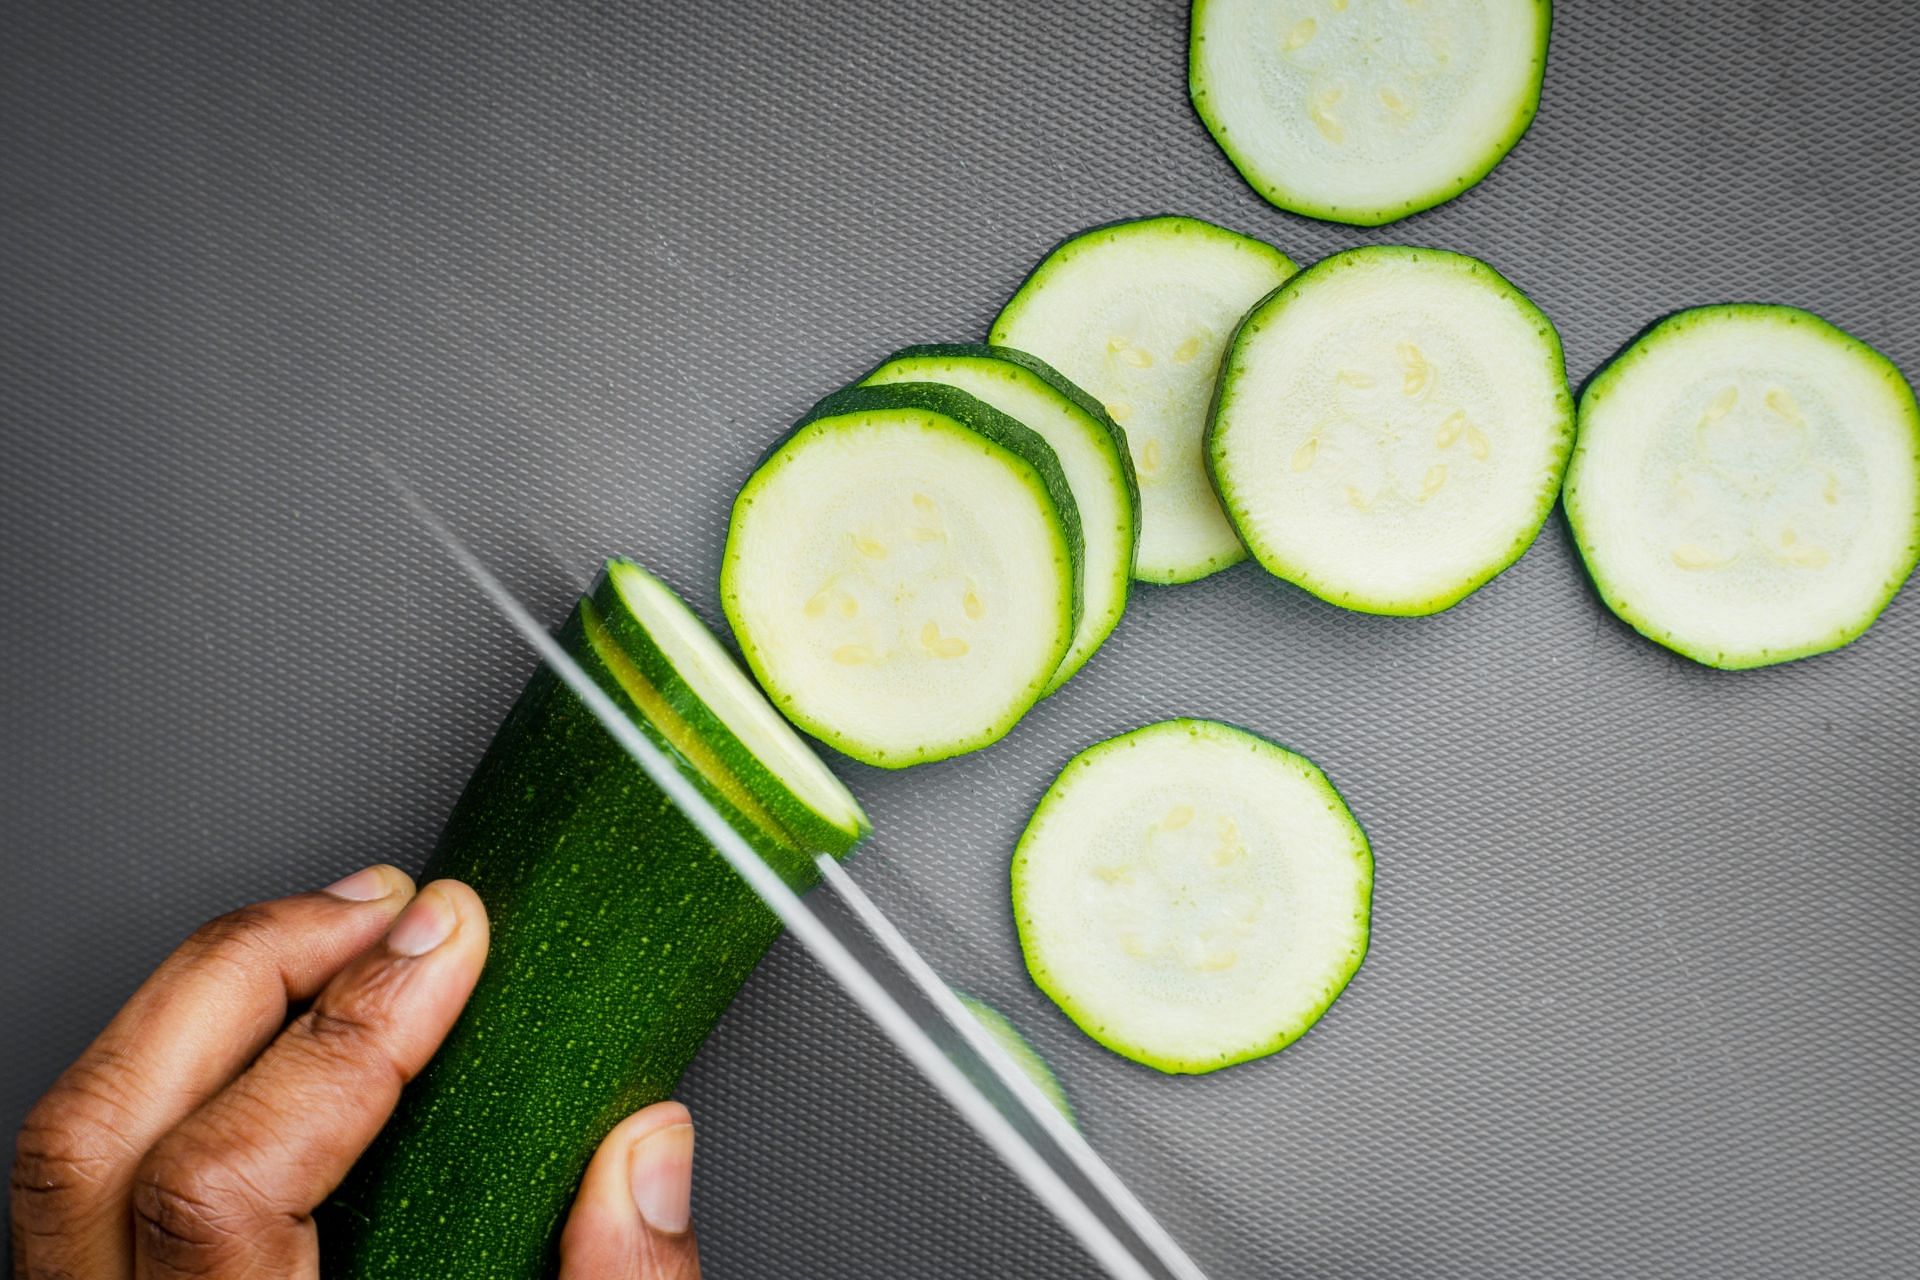 Sliced cucumber has cooling properties: Home remedies for body lice(Image by Louis Hansel/Unsplash)